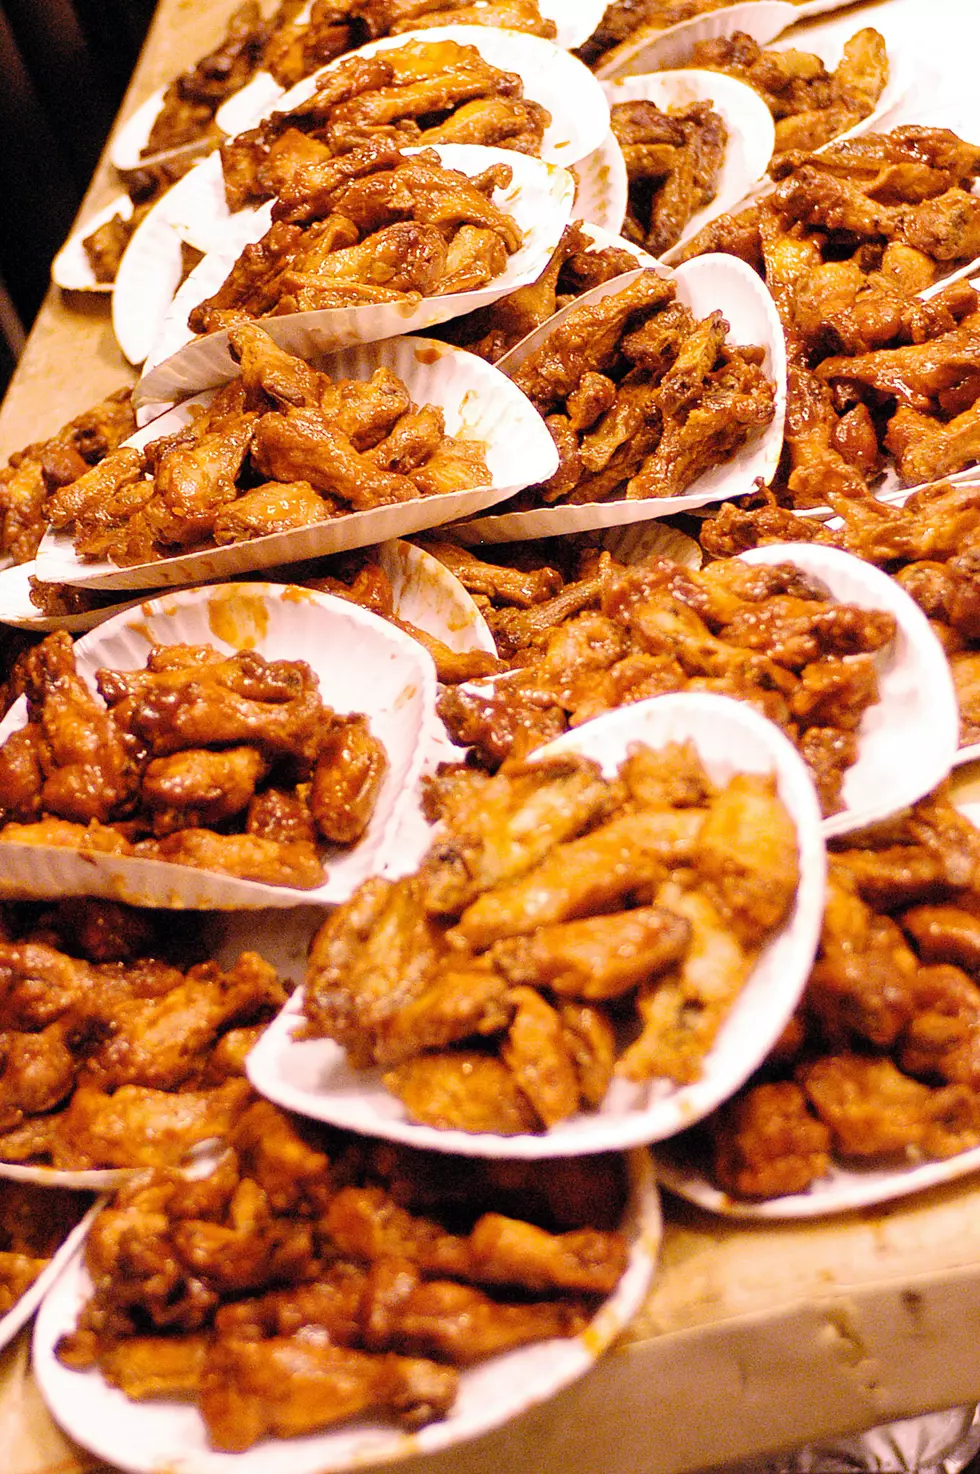 This Group Says It's Time To Stop Eating Buffalo Wings